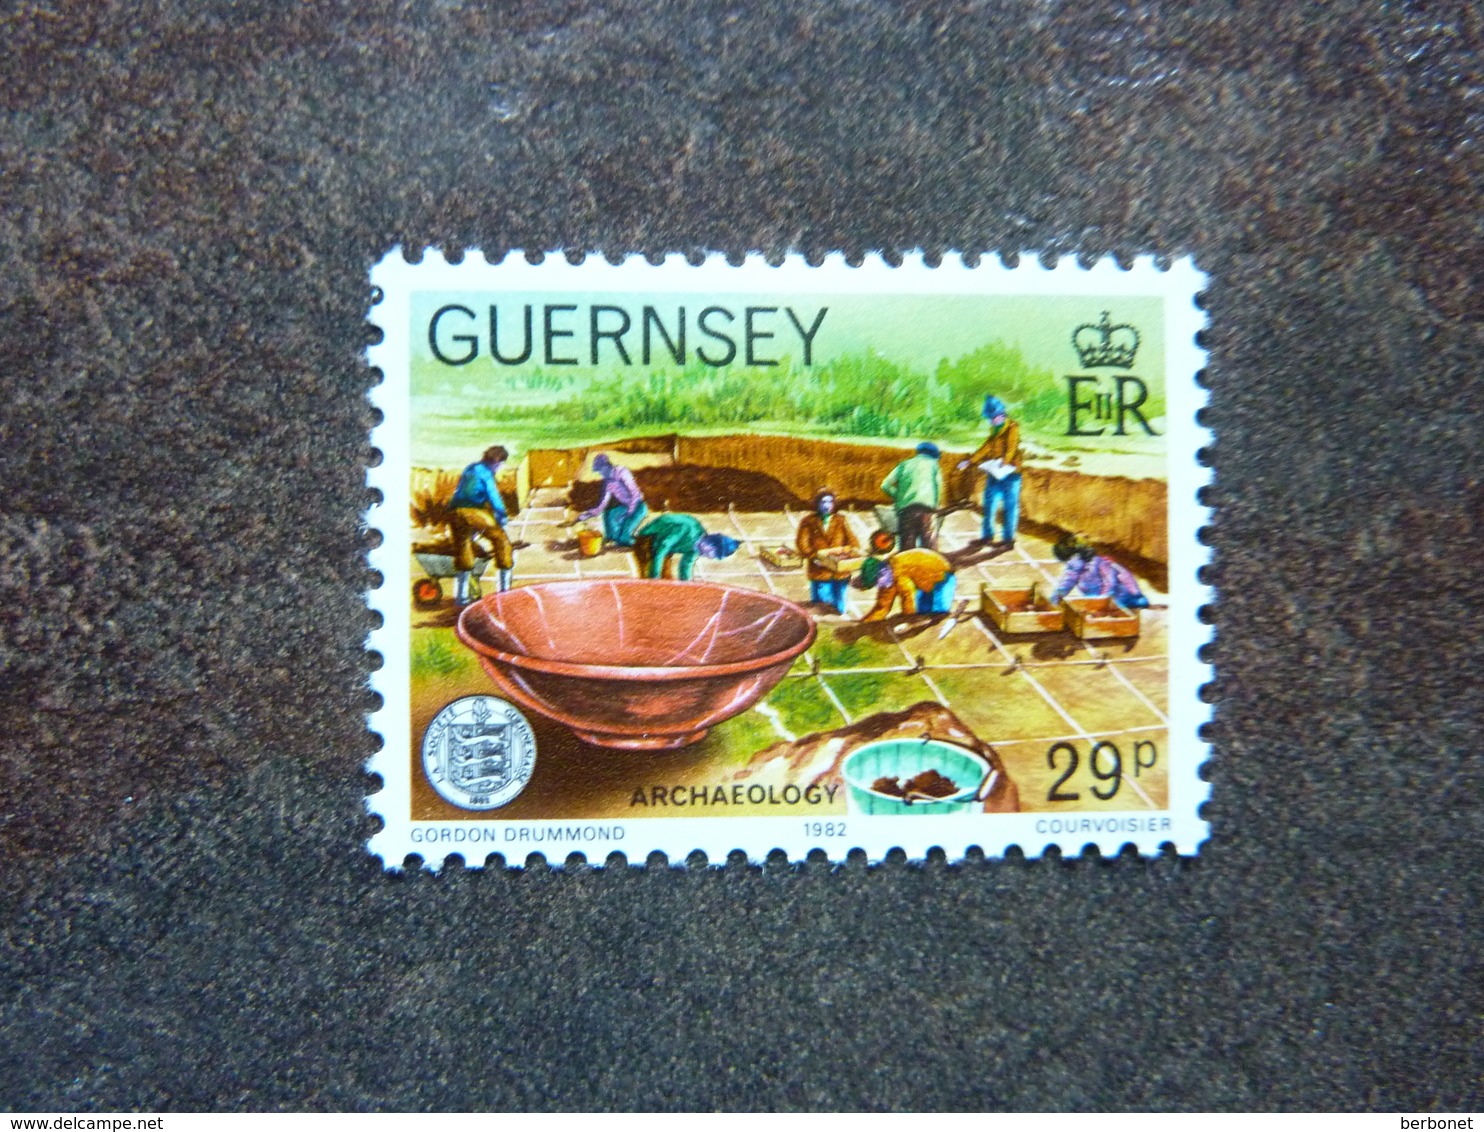 1982  Society Guernsey  Archaeology   SG = 258   ** MNH - Guernesey